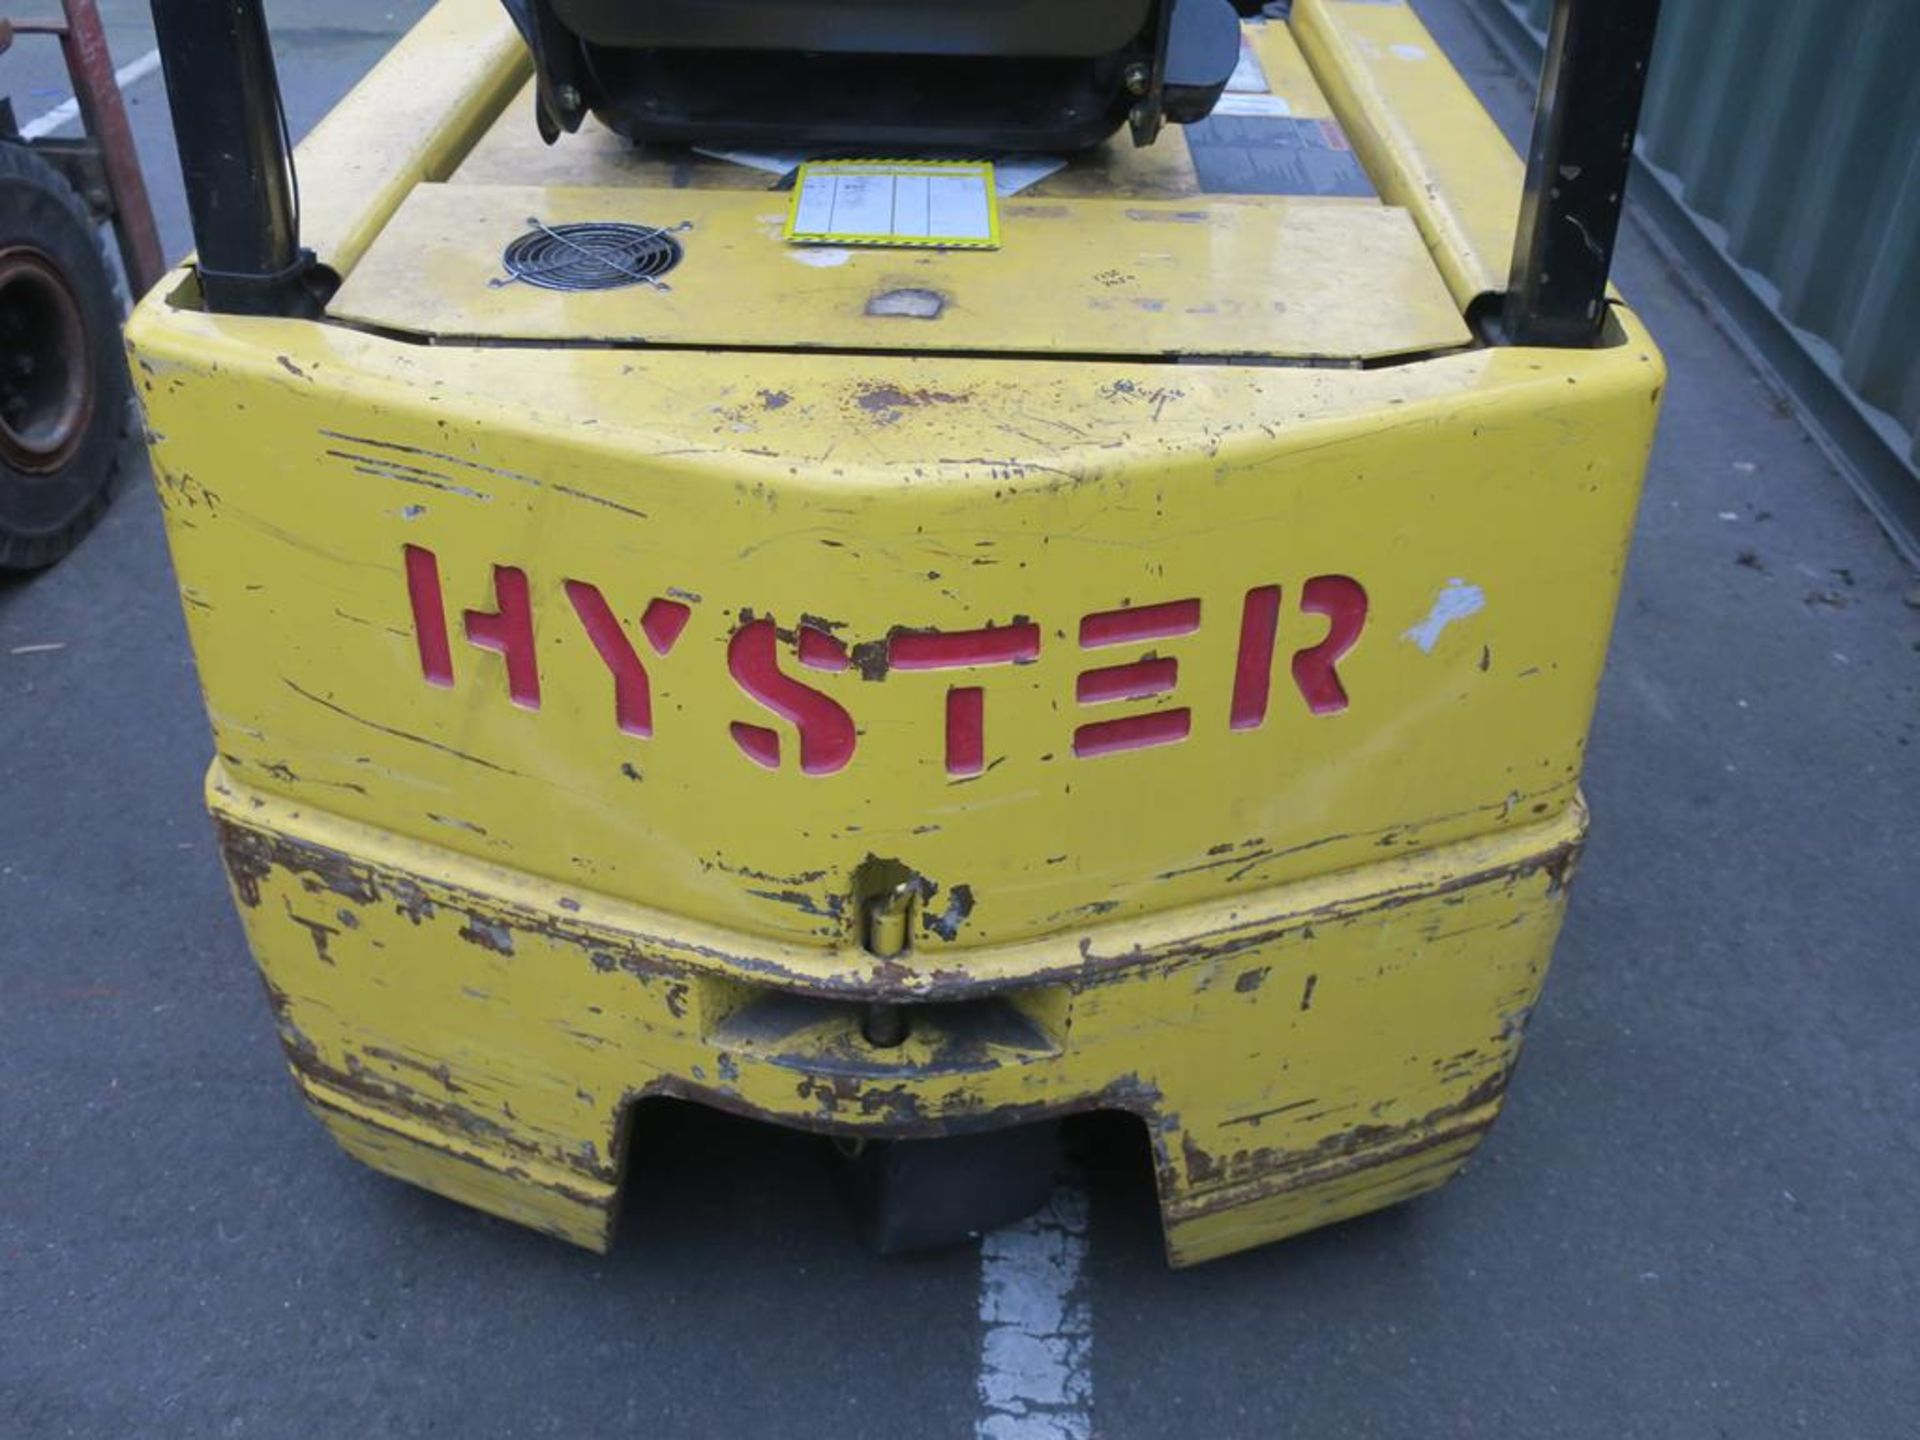 * Hyster 1.50 Electric Fork Lift comes with duplex mast, side shift and charger (RD Power - Image 6 of 10